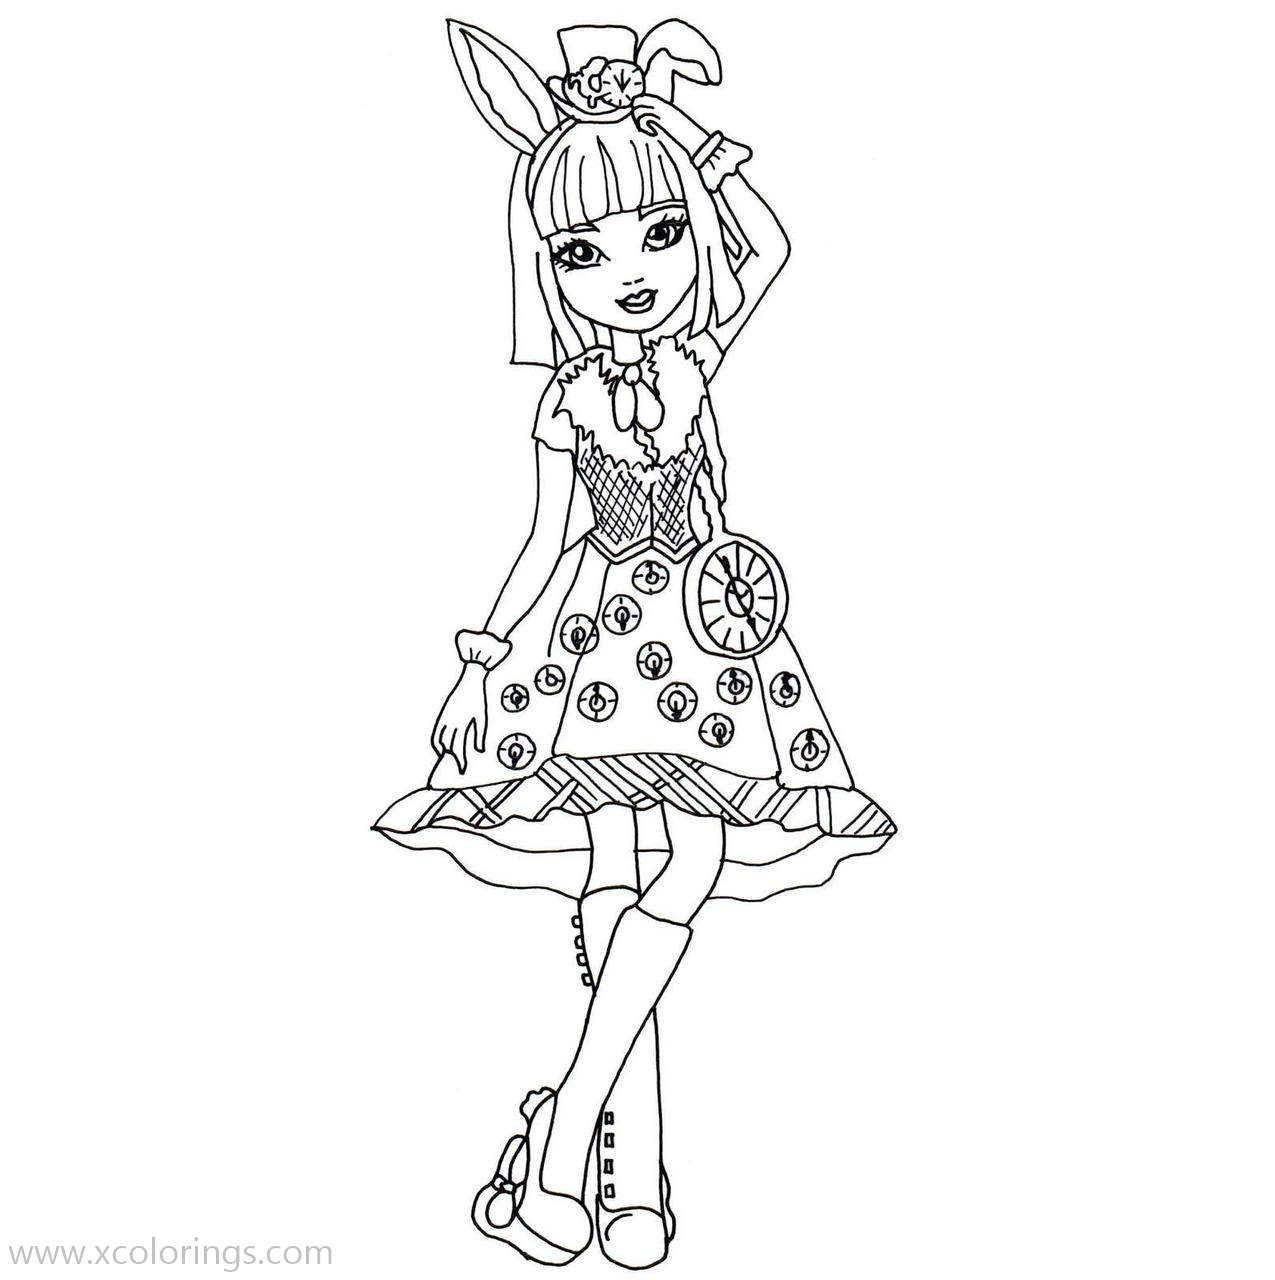 Free Ever After High Coloring Pages Bunny Blanc printable